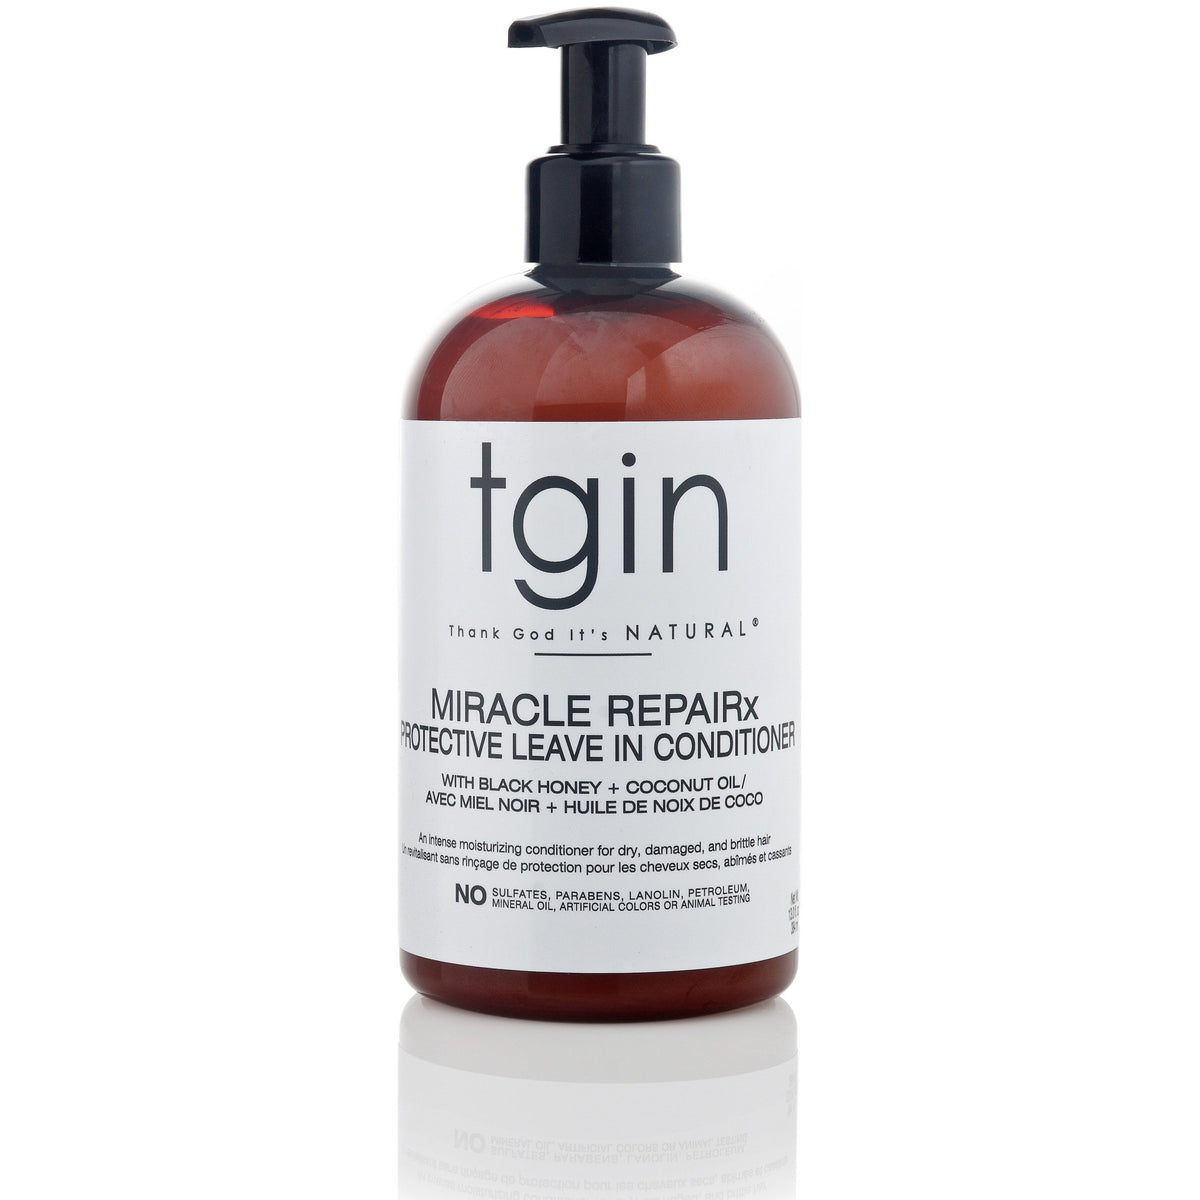 TGIN - Miracle RepaiRx Protective Leave in Conditioner